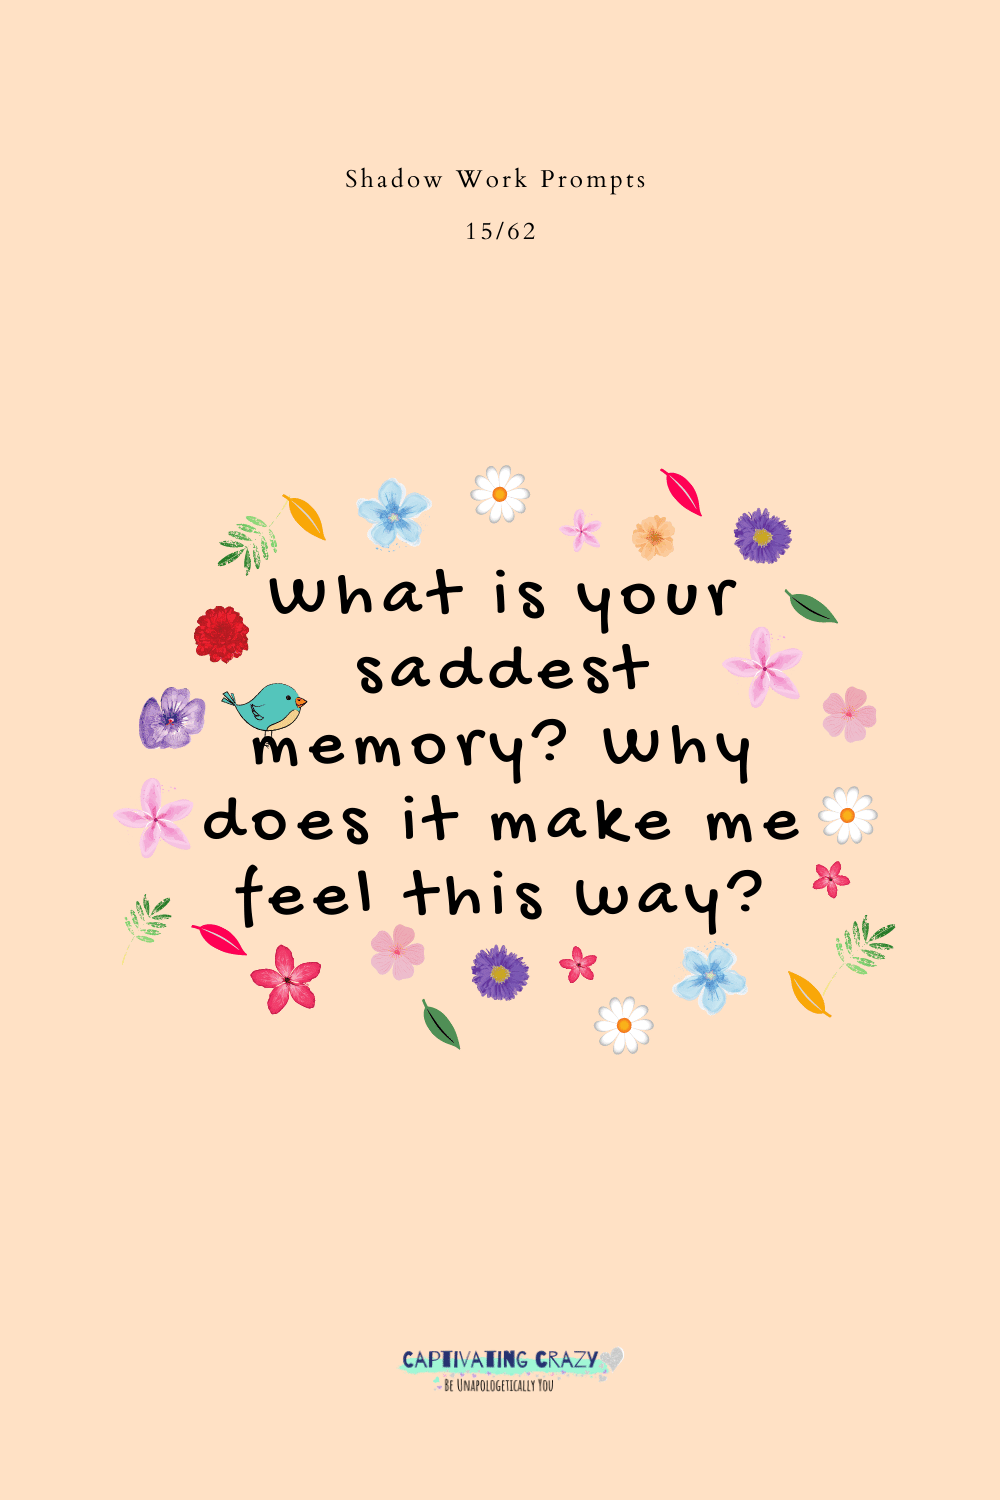 What is your saddest memory? Why does it make me feel this way?